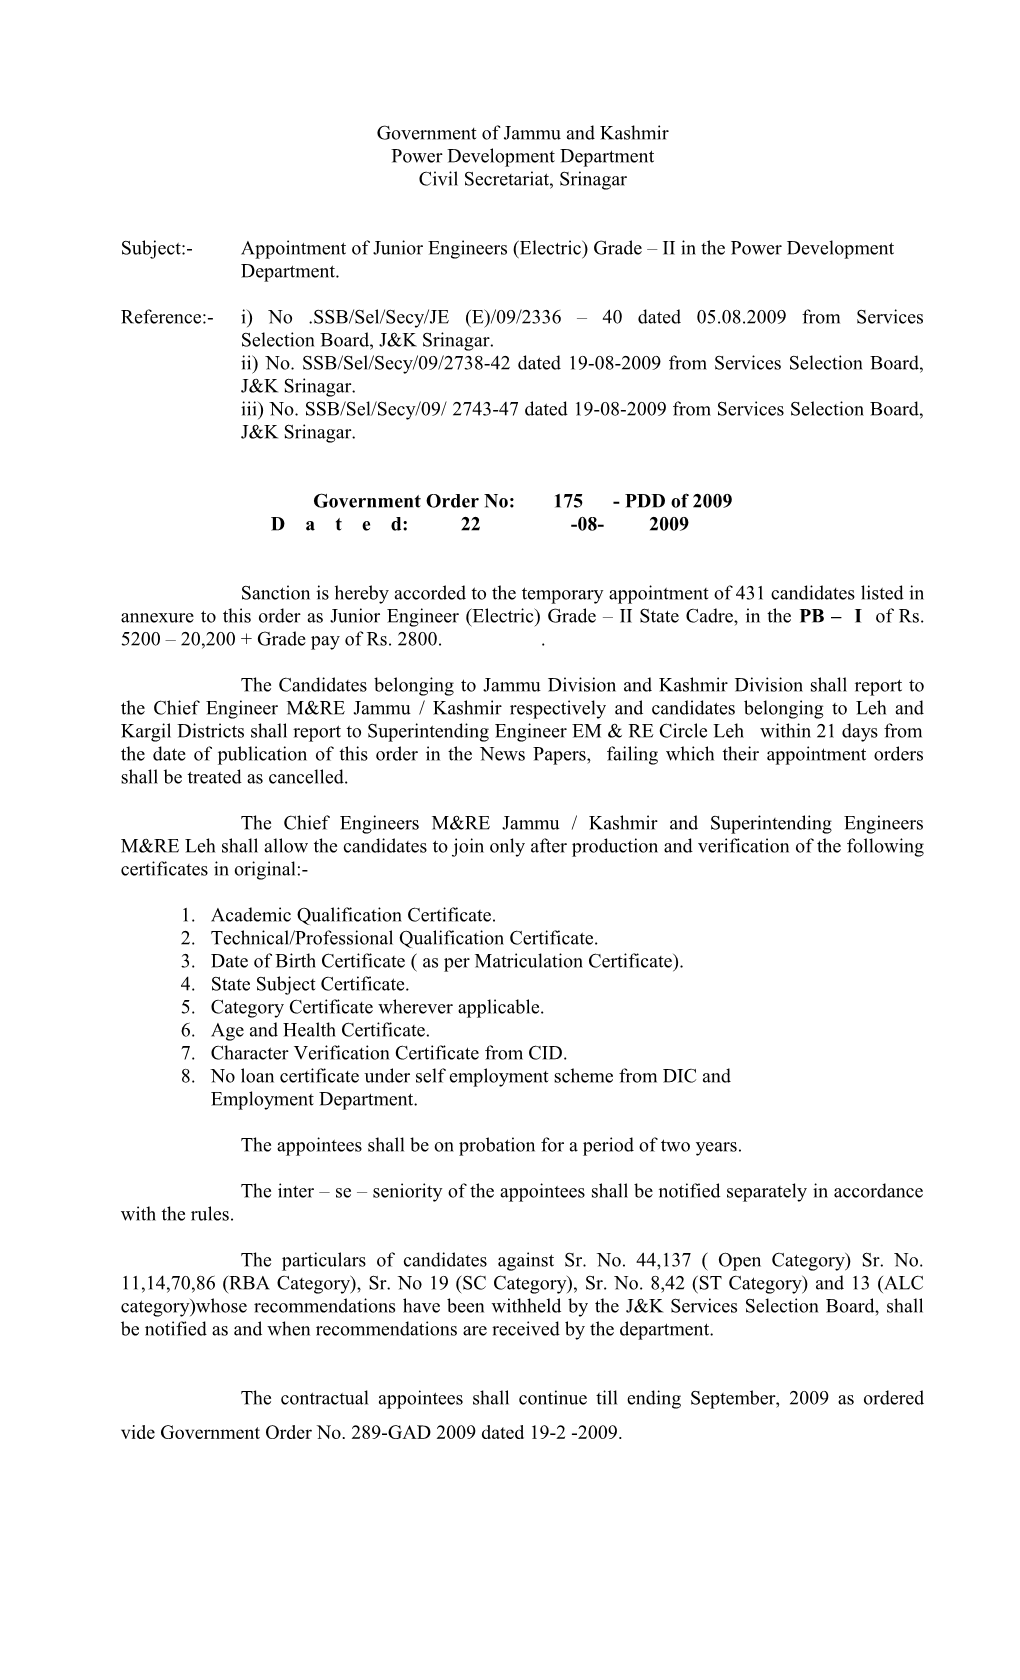 Annexure to Government Order No: 175- PDD of 2009 Dated